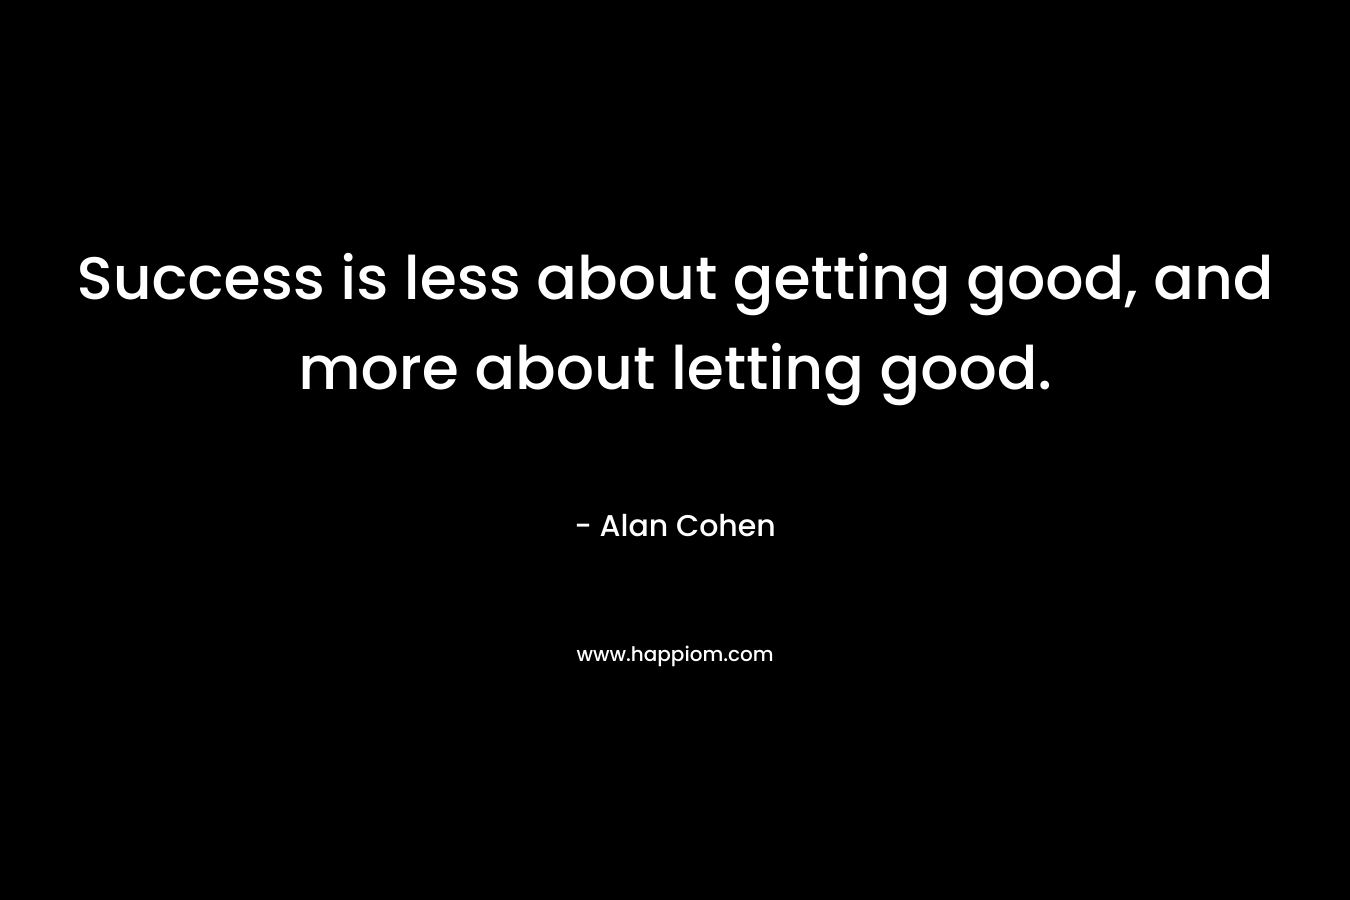 Success is less about getting good, and more about letting good.